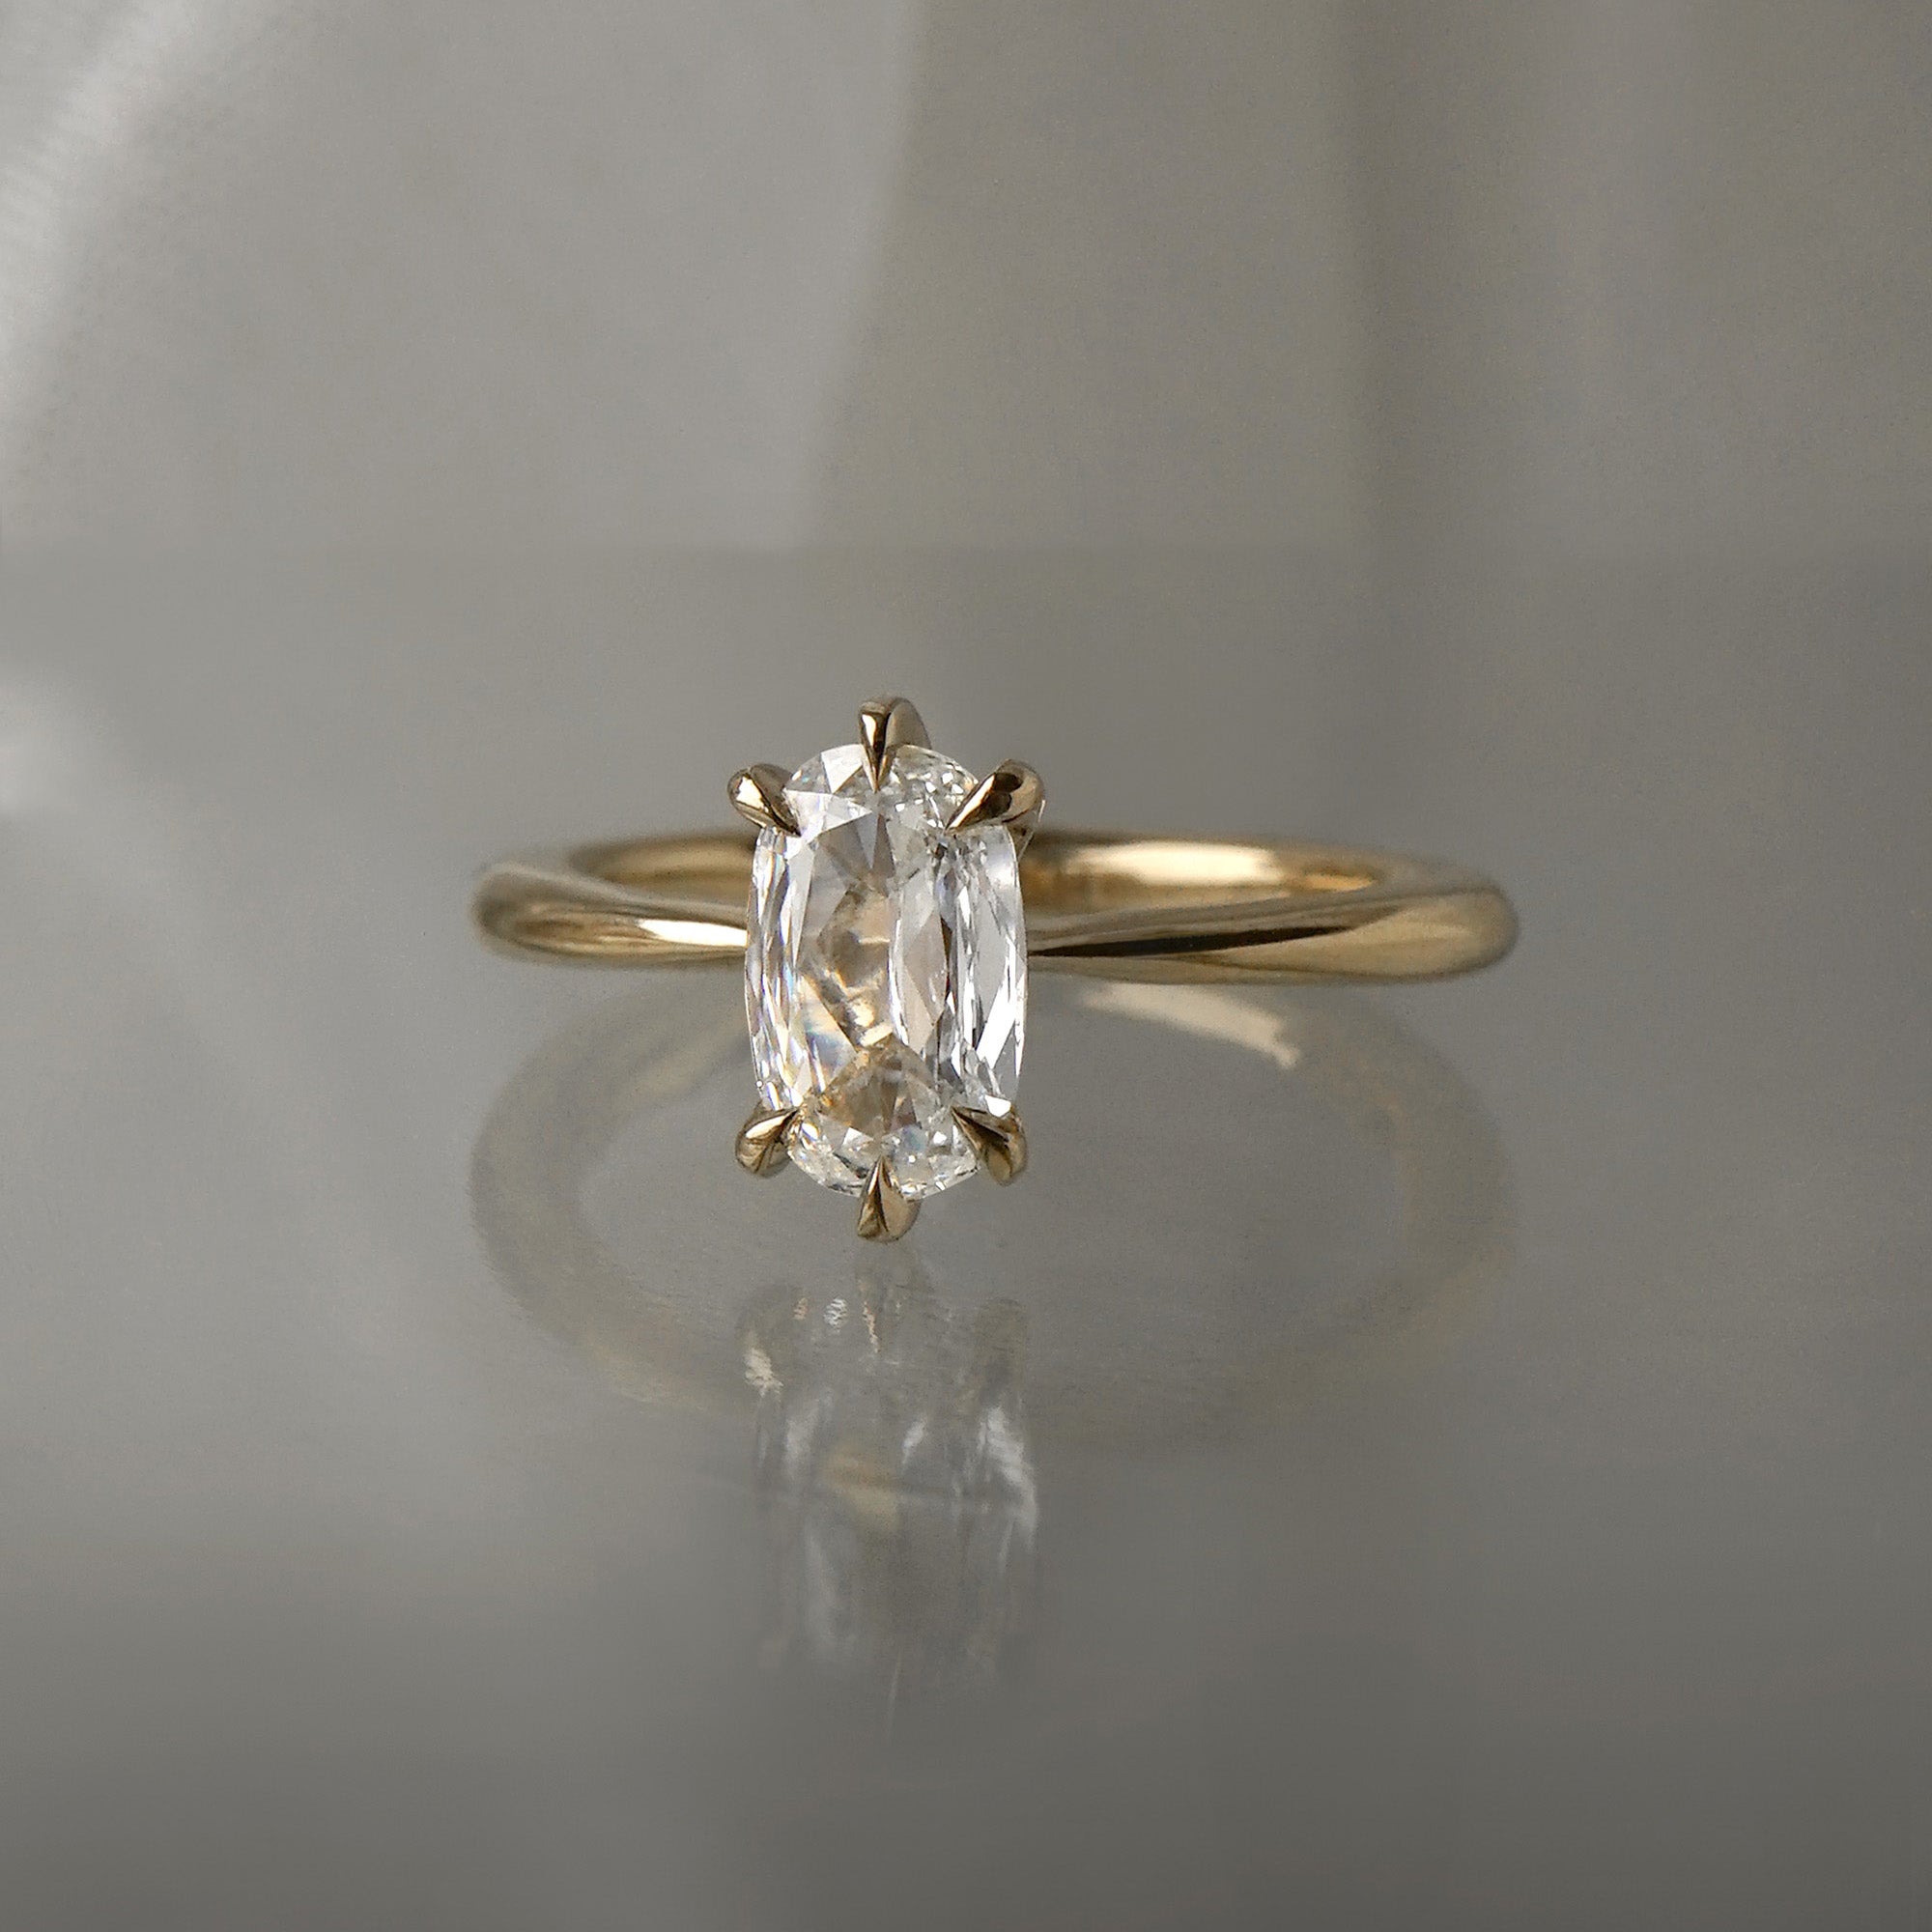 A one of a kind "Aurelia" style ring by Laurie Fleming Jewellery, featuring a unique elongated oval diamond with antique-inspired facets, on a gently tapered and rounded solid gold band. The ring is situated against a medium grey background.